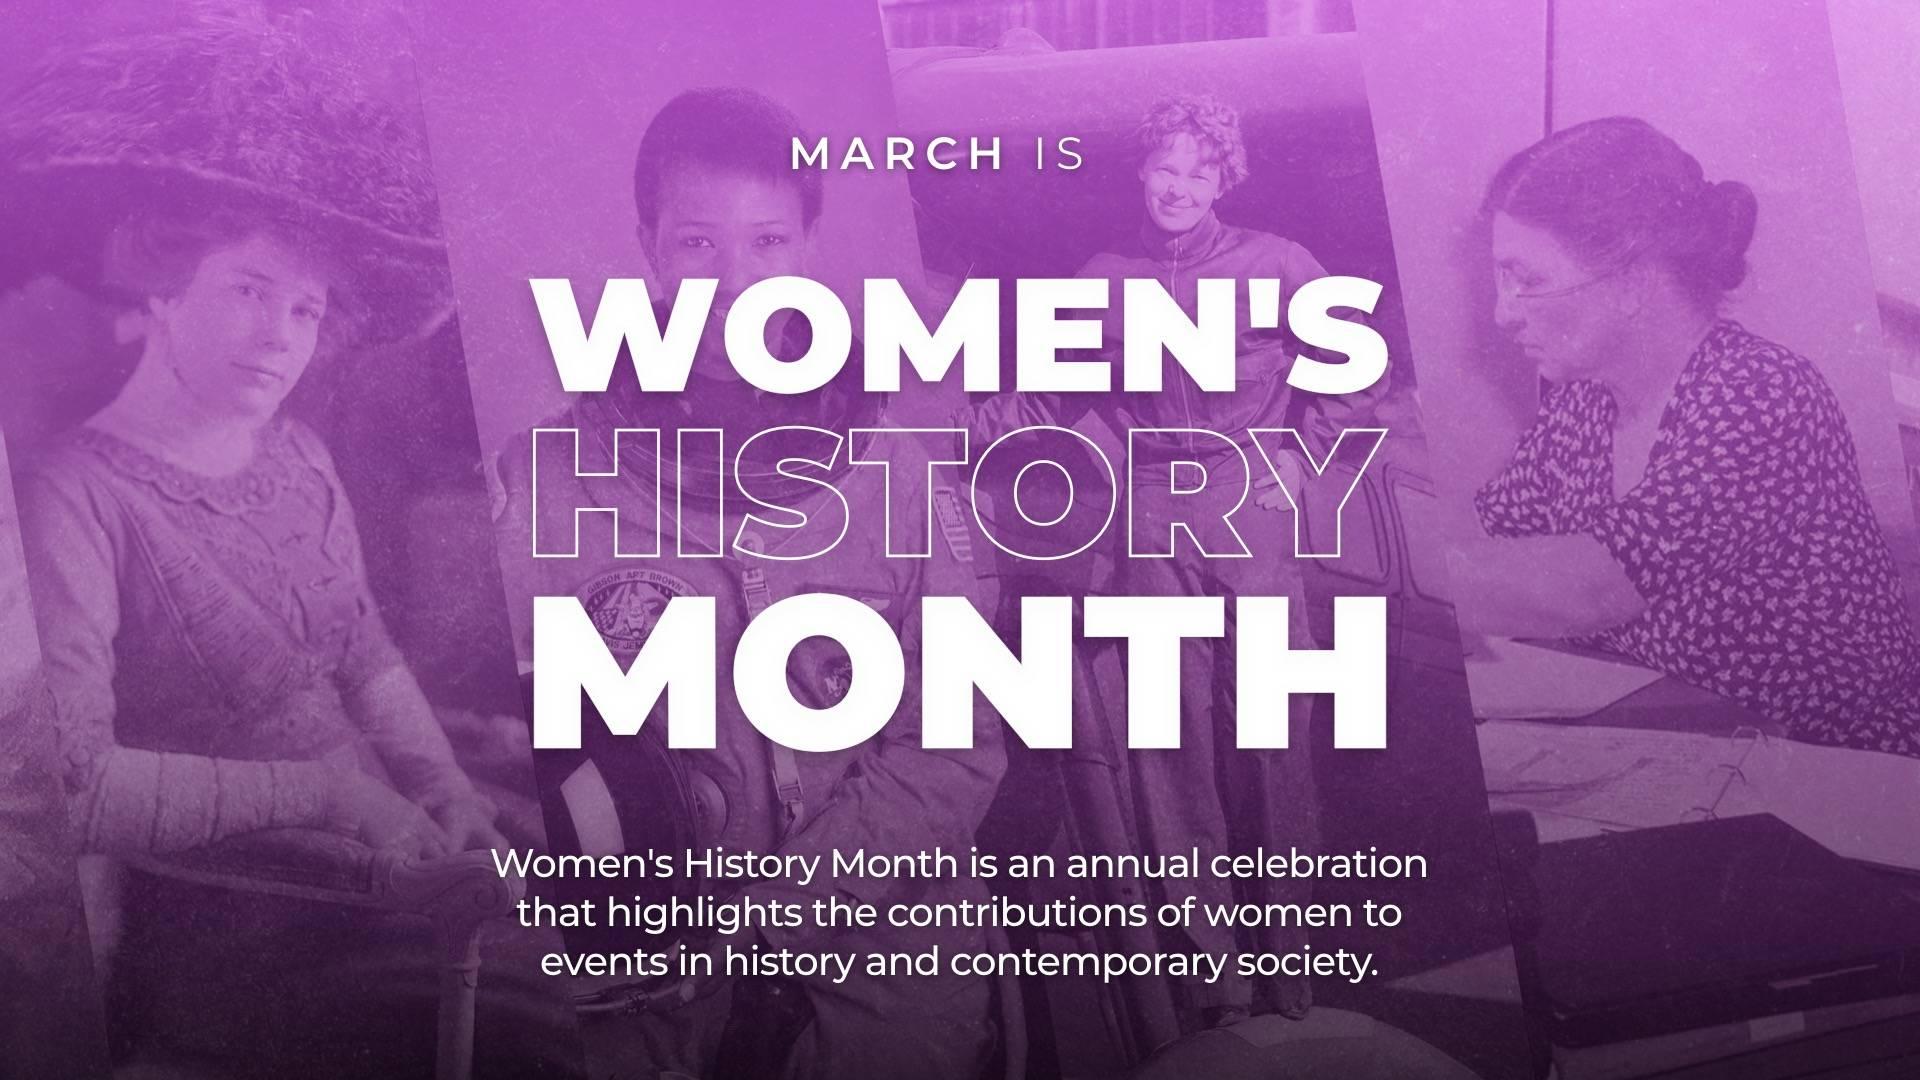 Women's History Month - Digital Signage Template